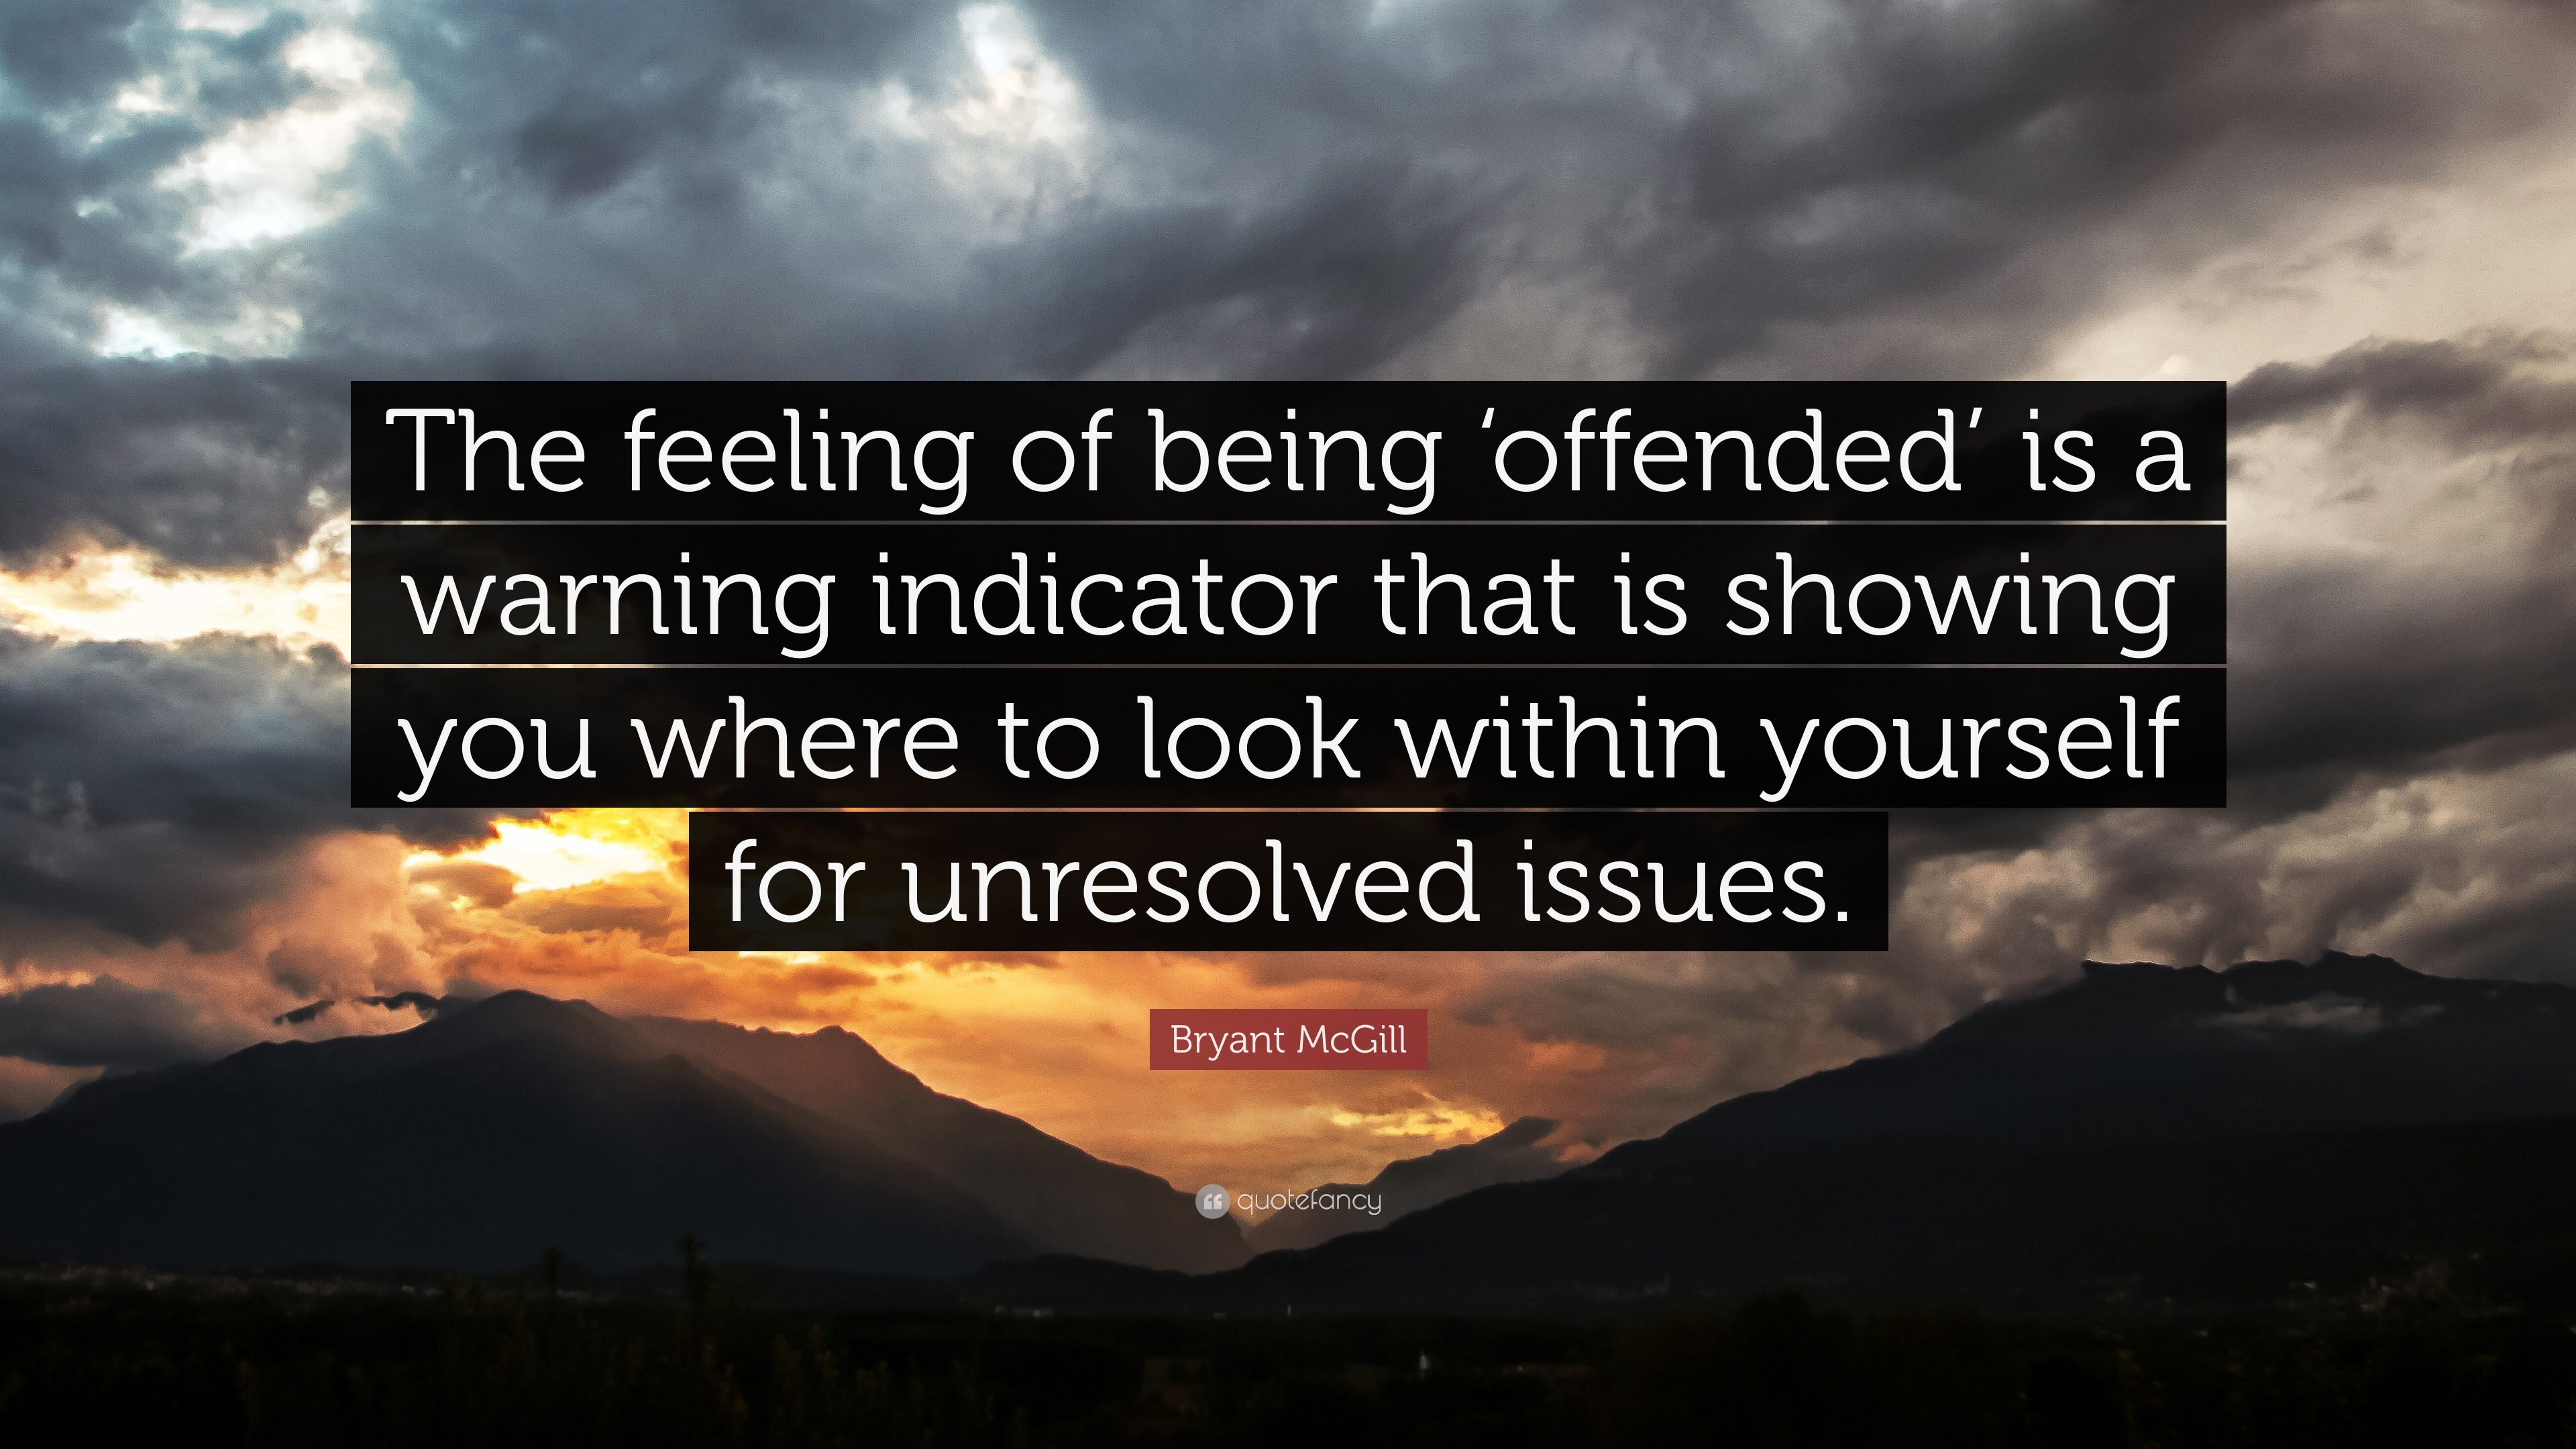 Bryant McGill Quote: “The feeling of being ‘offended’ is a warning